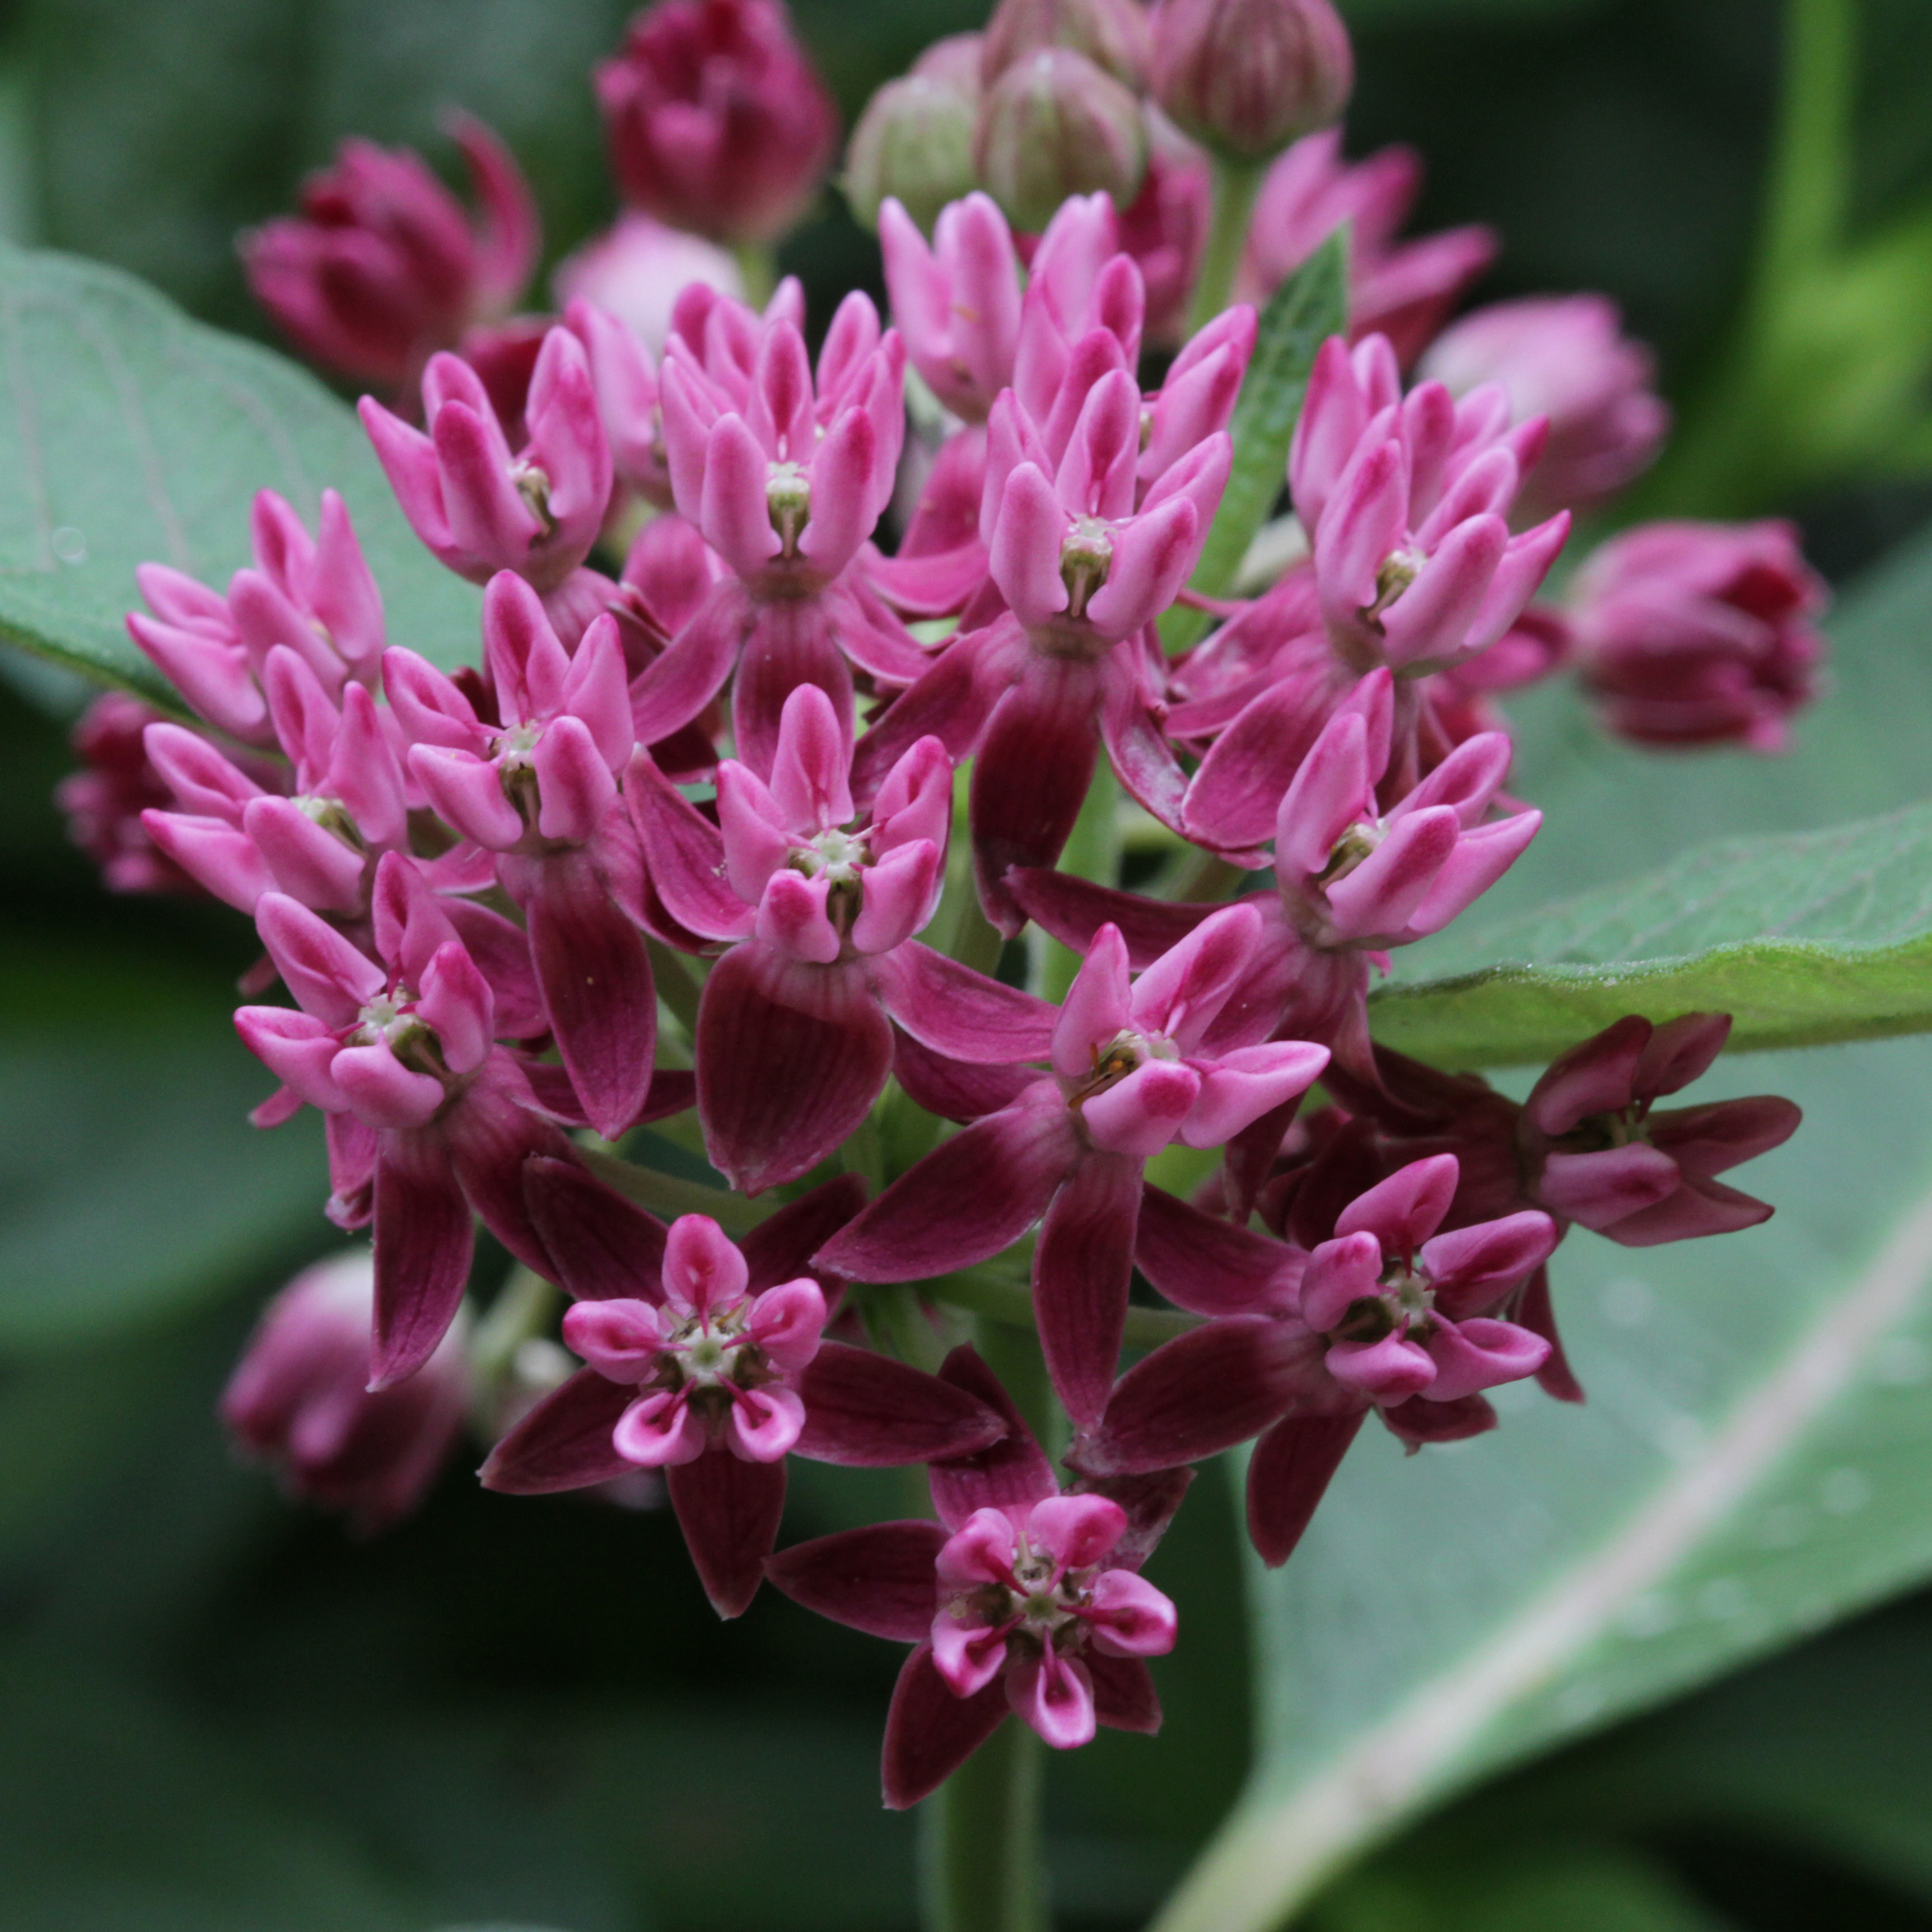 The Scientific Name is Asclepias purpurascens. You will likely hear them called Purple Milkweed. This picture shows the Detail of Purple Milkweed showing a cluster of blossoms each with deep rose , strongly reflexed corolla lobes. of Asclepias purpurascens